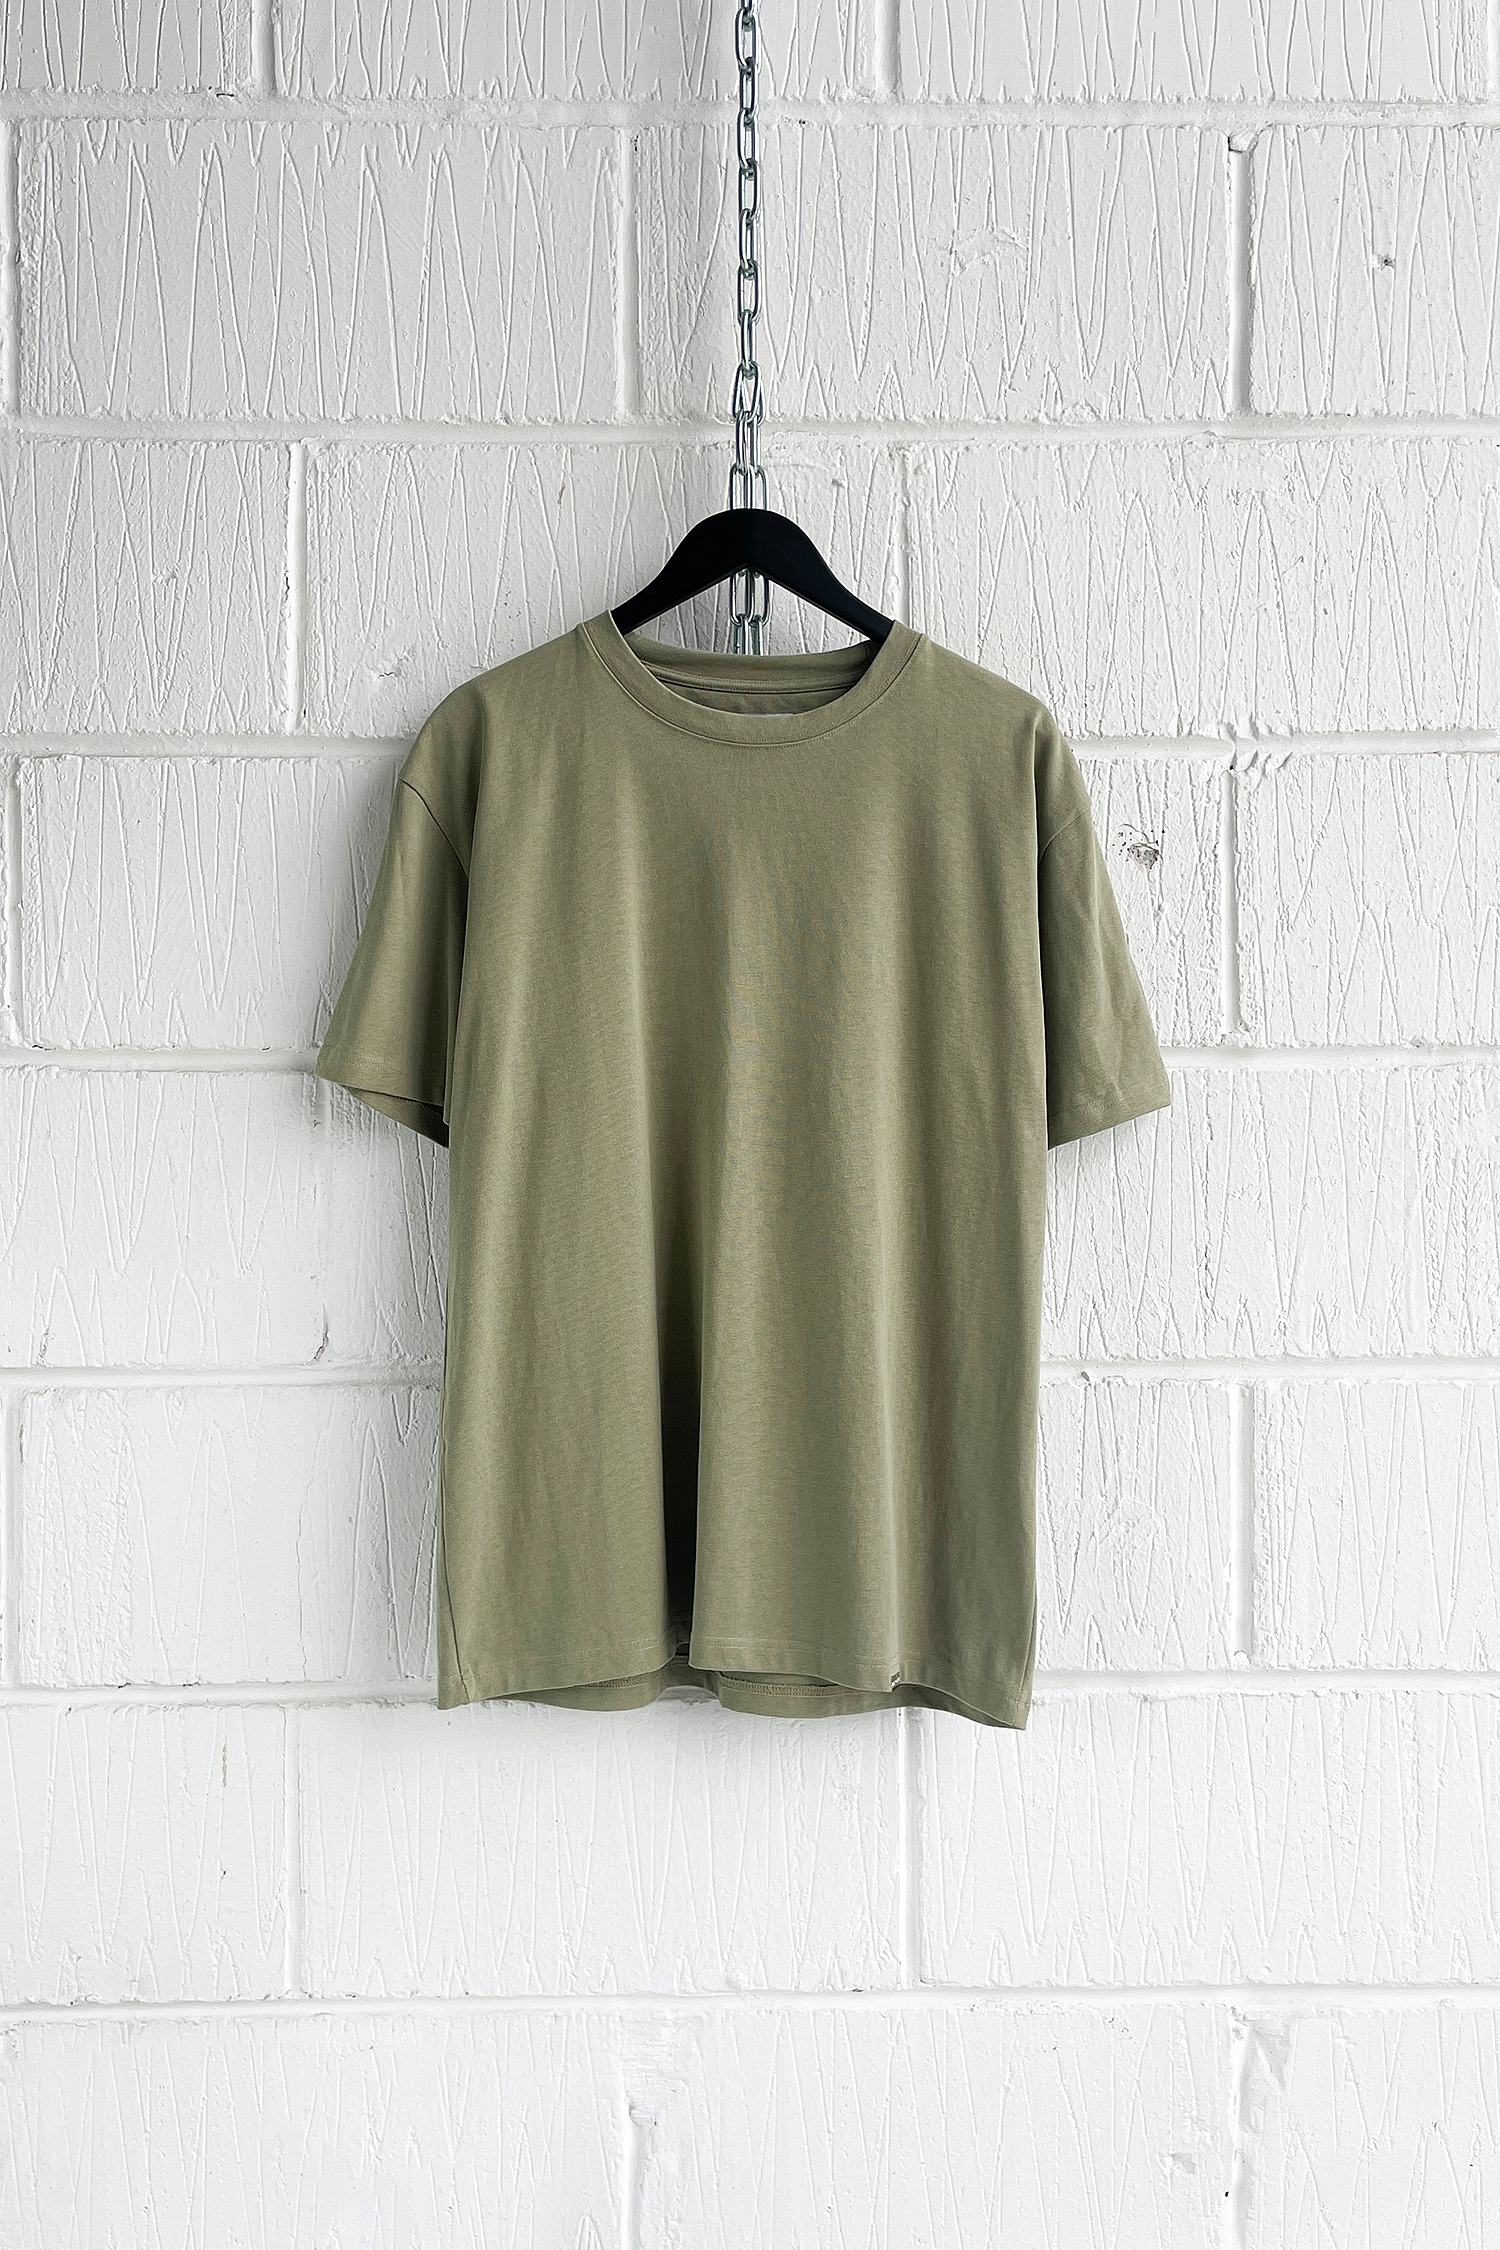 SAMPLE T-SHIRT — REMASTERED EARTH GREEN (L)